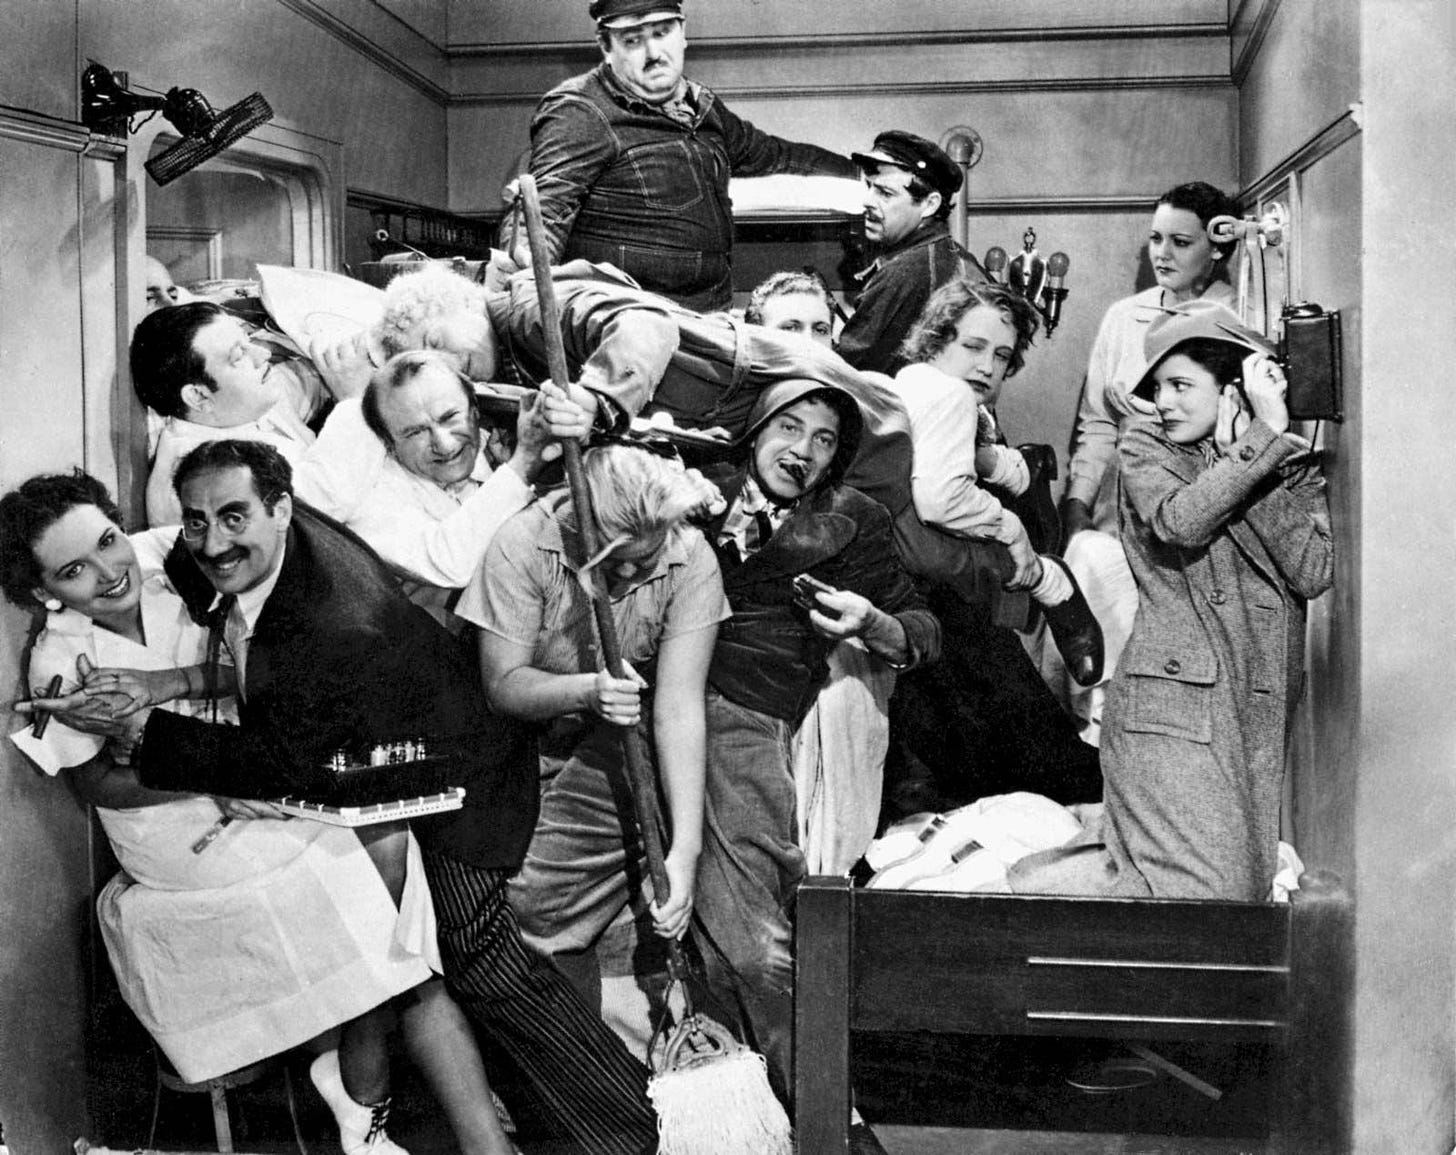 A Night at the Opera | Musical Comedy, Marx Brothers, Groucho | Britannica